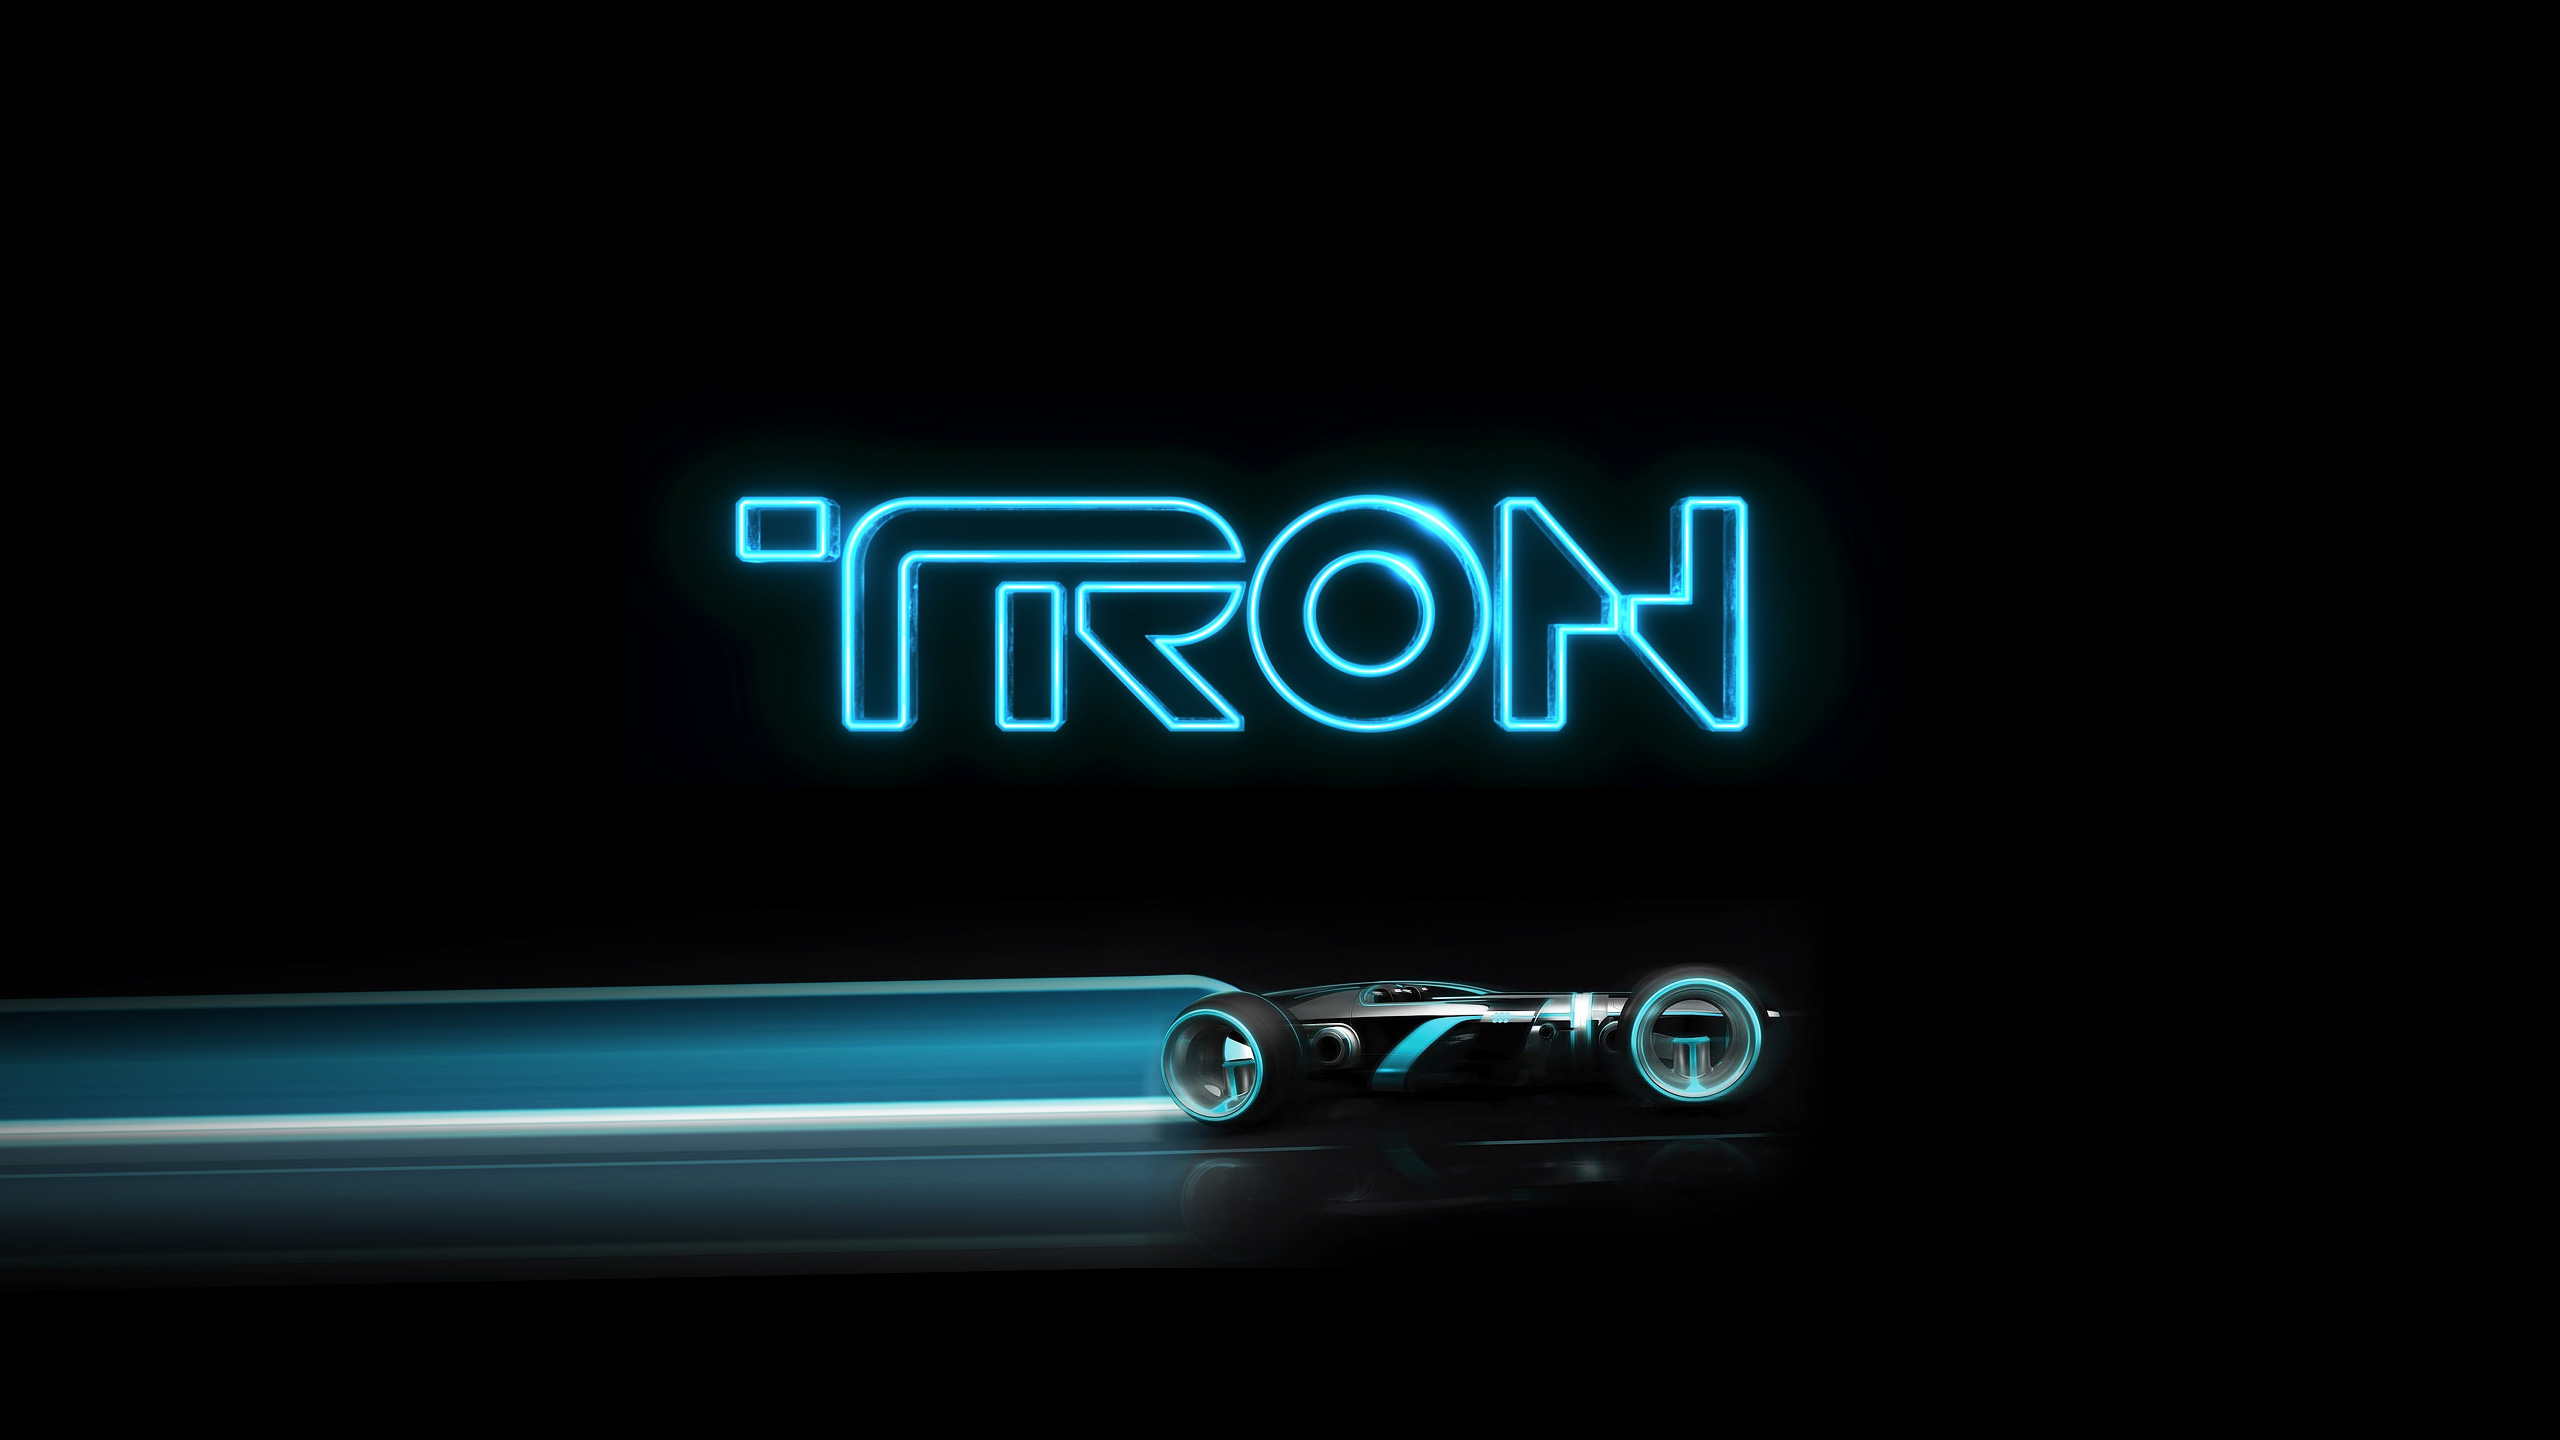 TRON 3 set to begin filming in the Fall